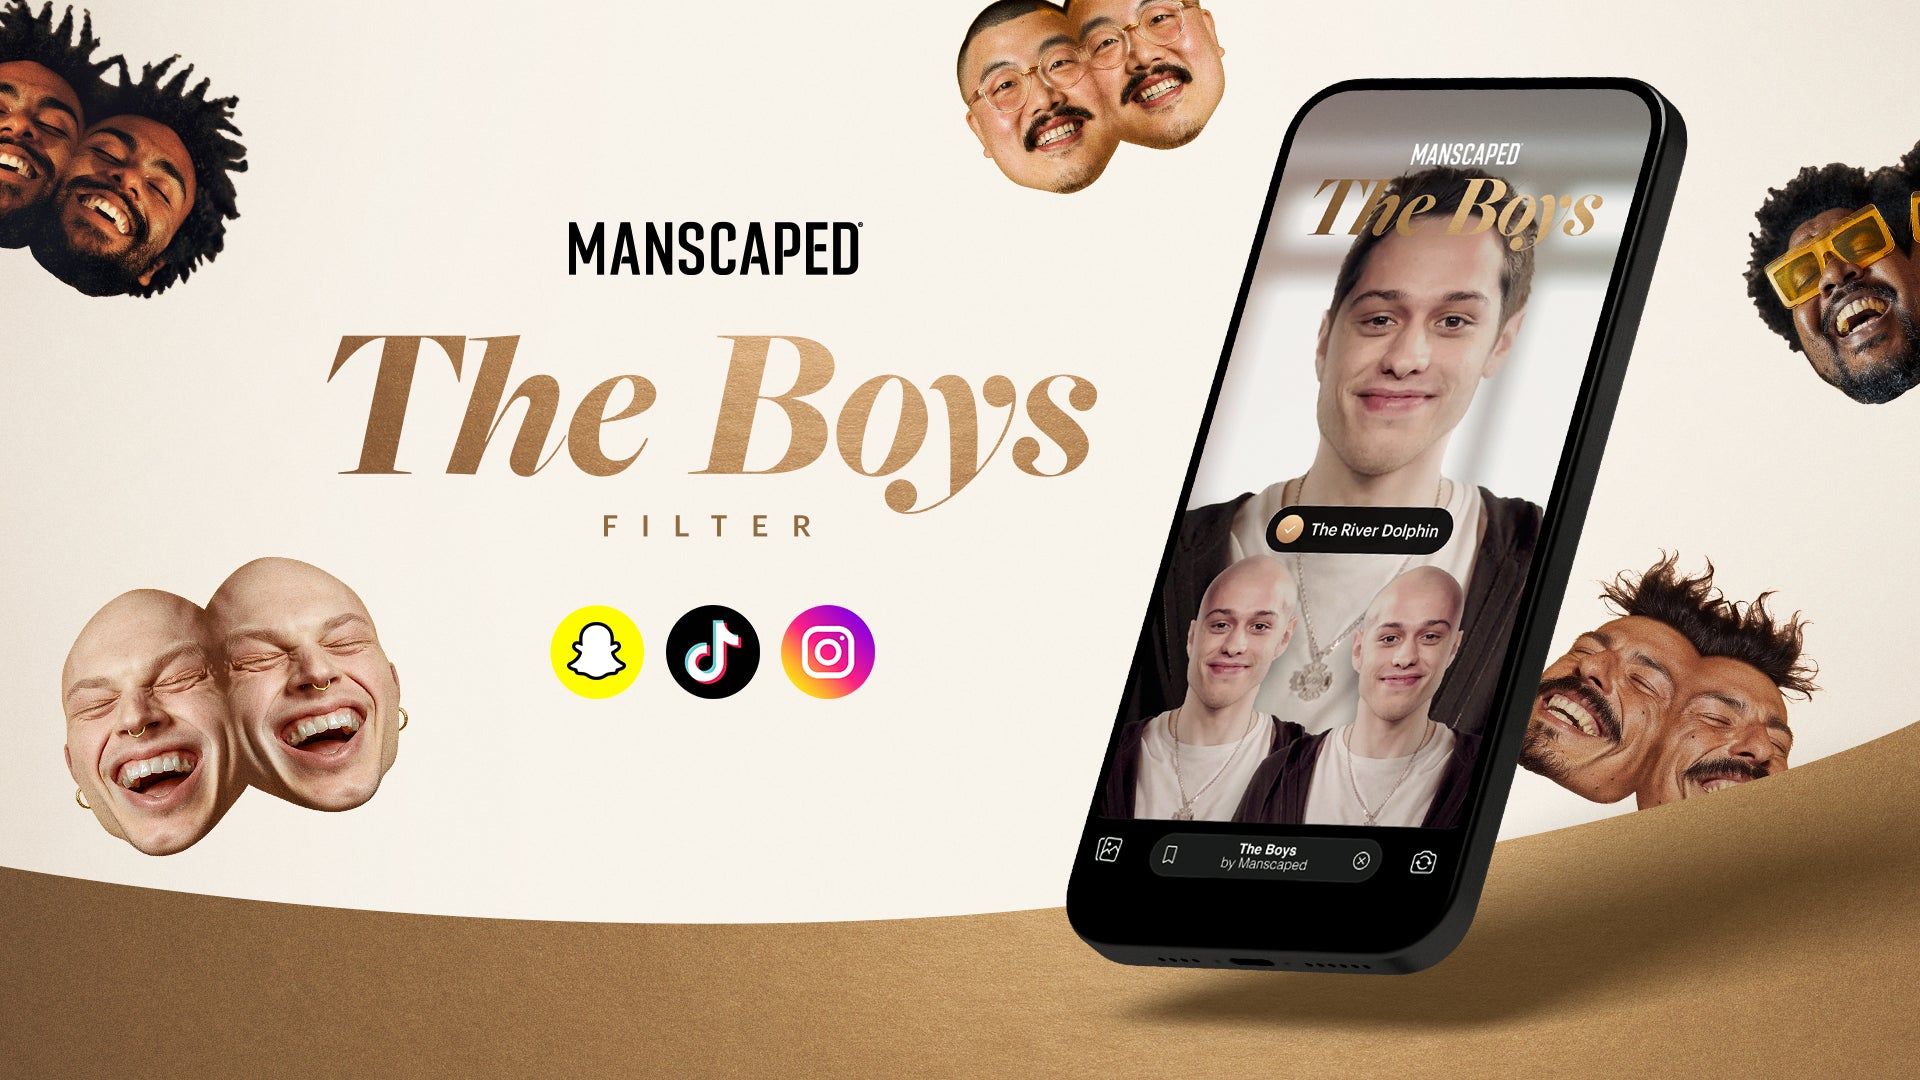 How To Get MANSCAPED's 'The Boys’ AR Filter for Social Media